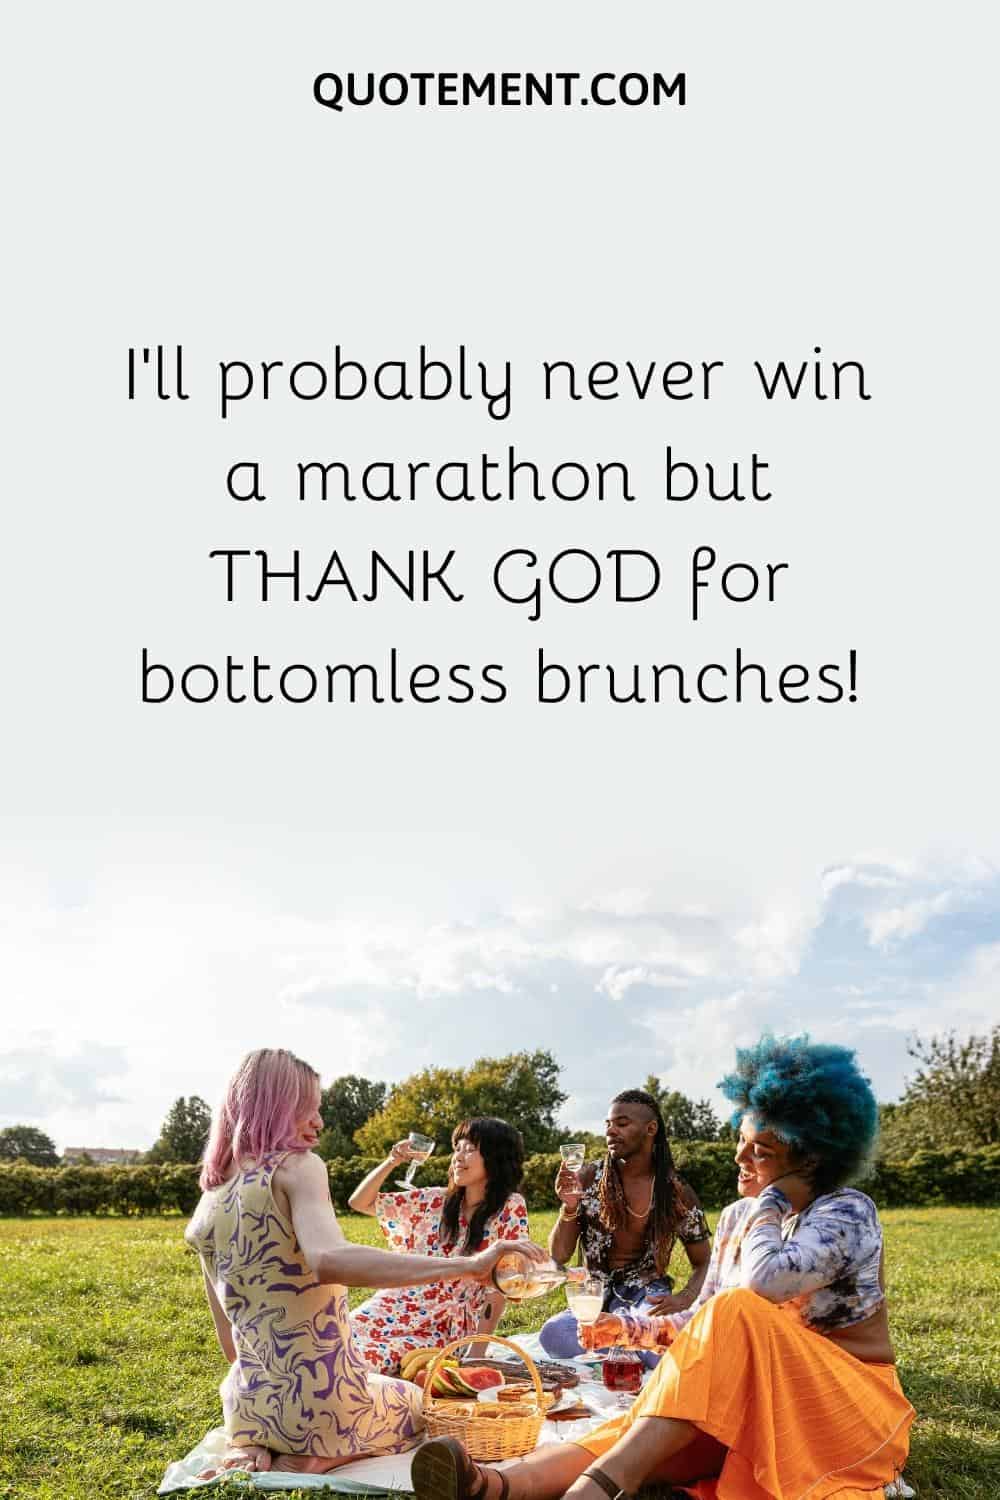 I'll probably never win a marathon but THANK GOD for bottomless brunches!